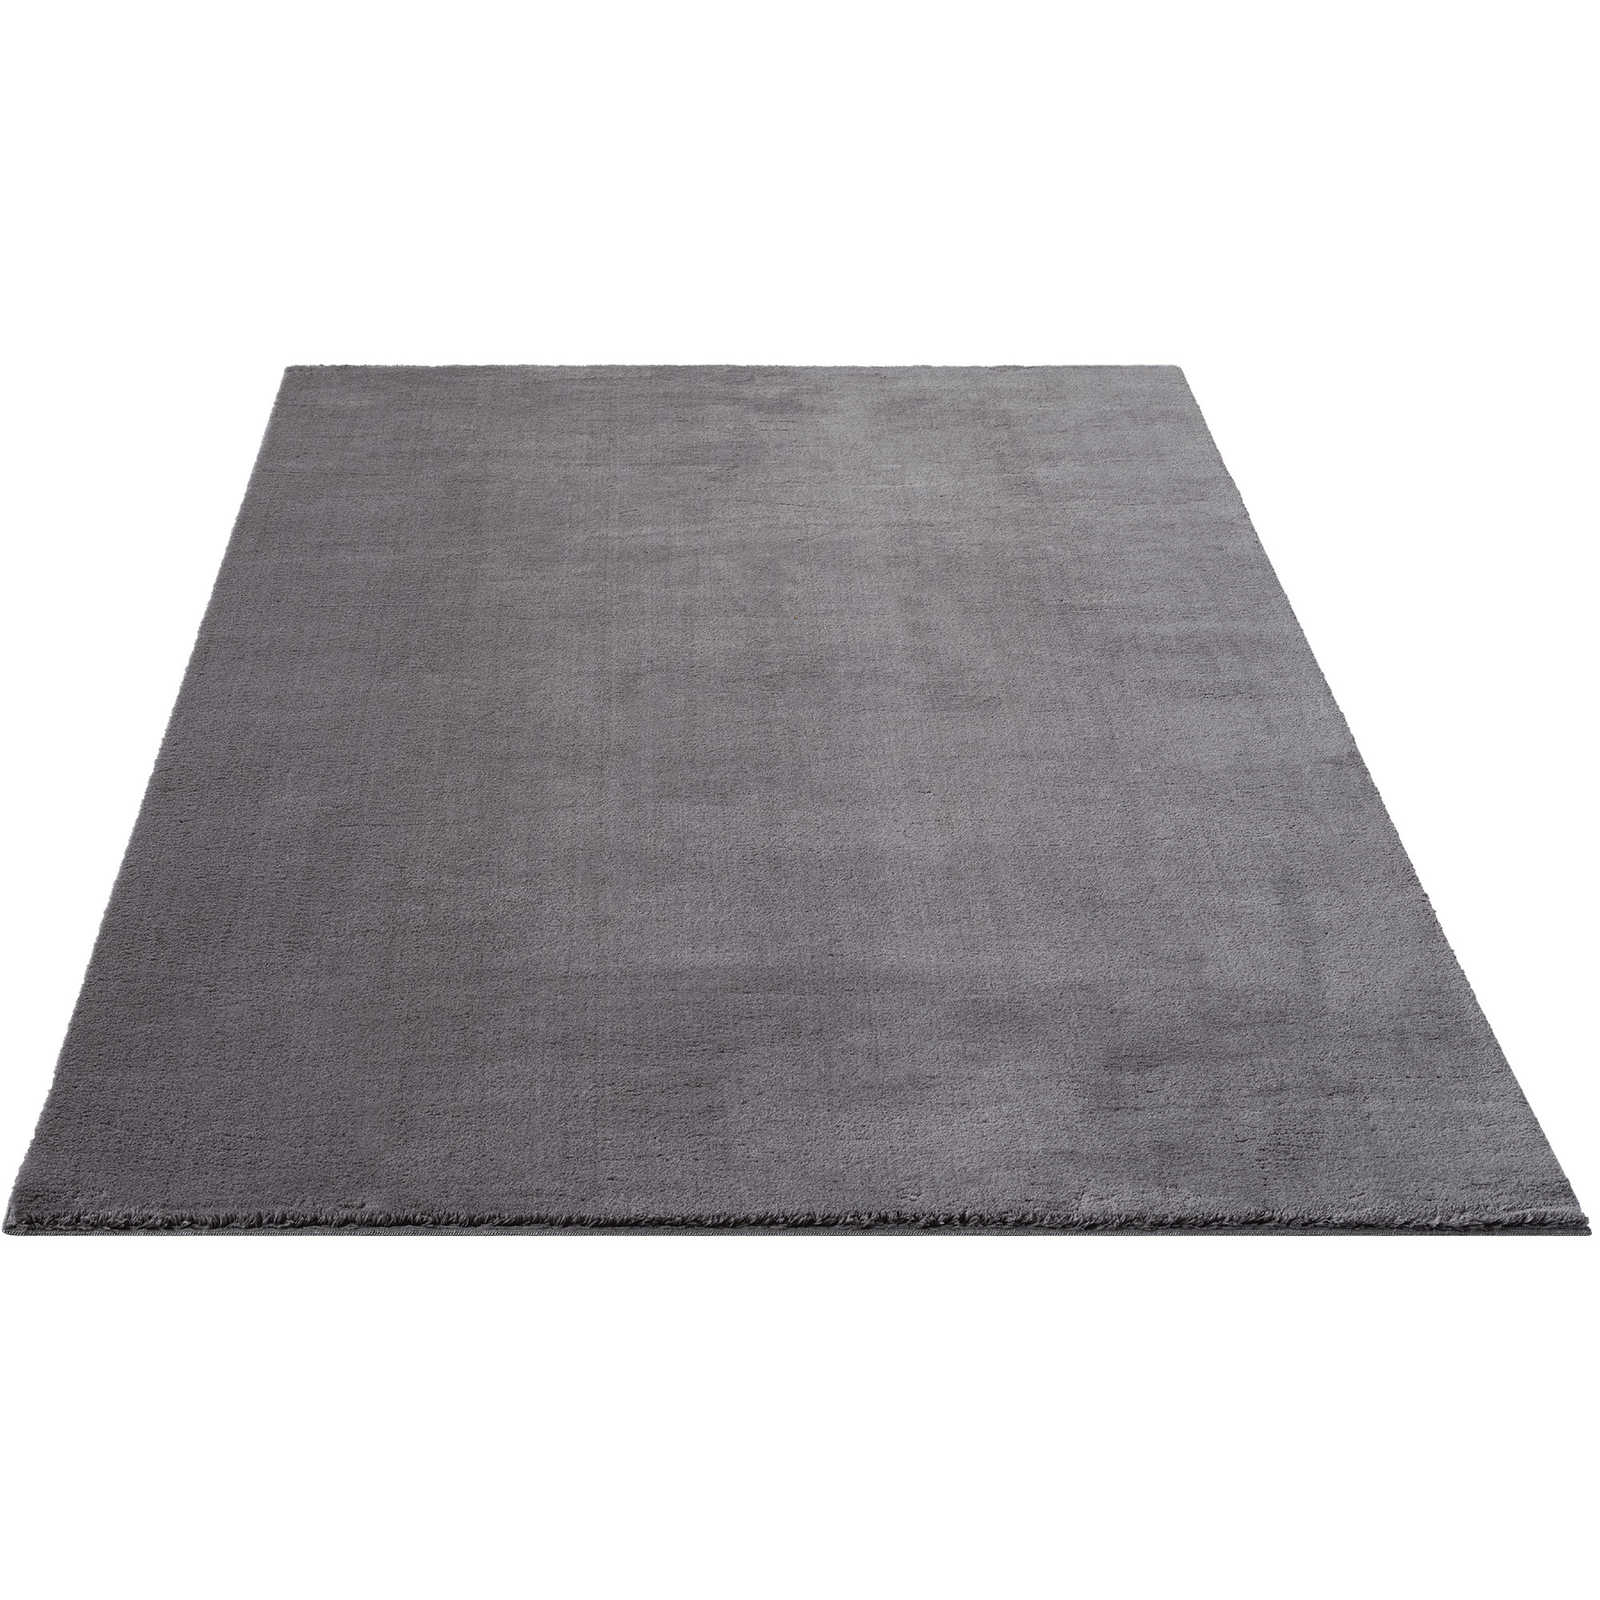 Fluffy high pile carpet in anthracite - 340 x 240 cm
